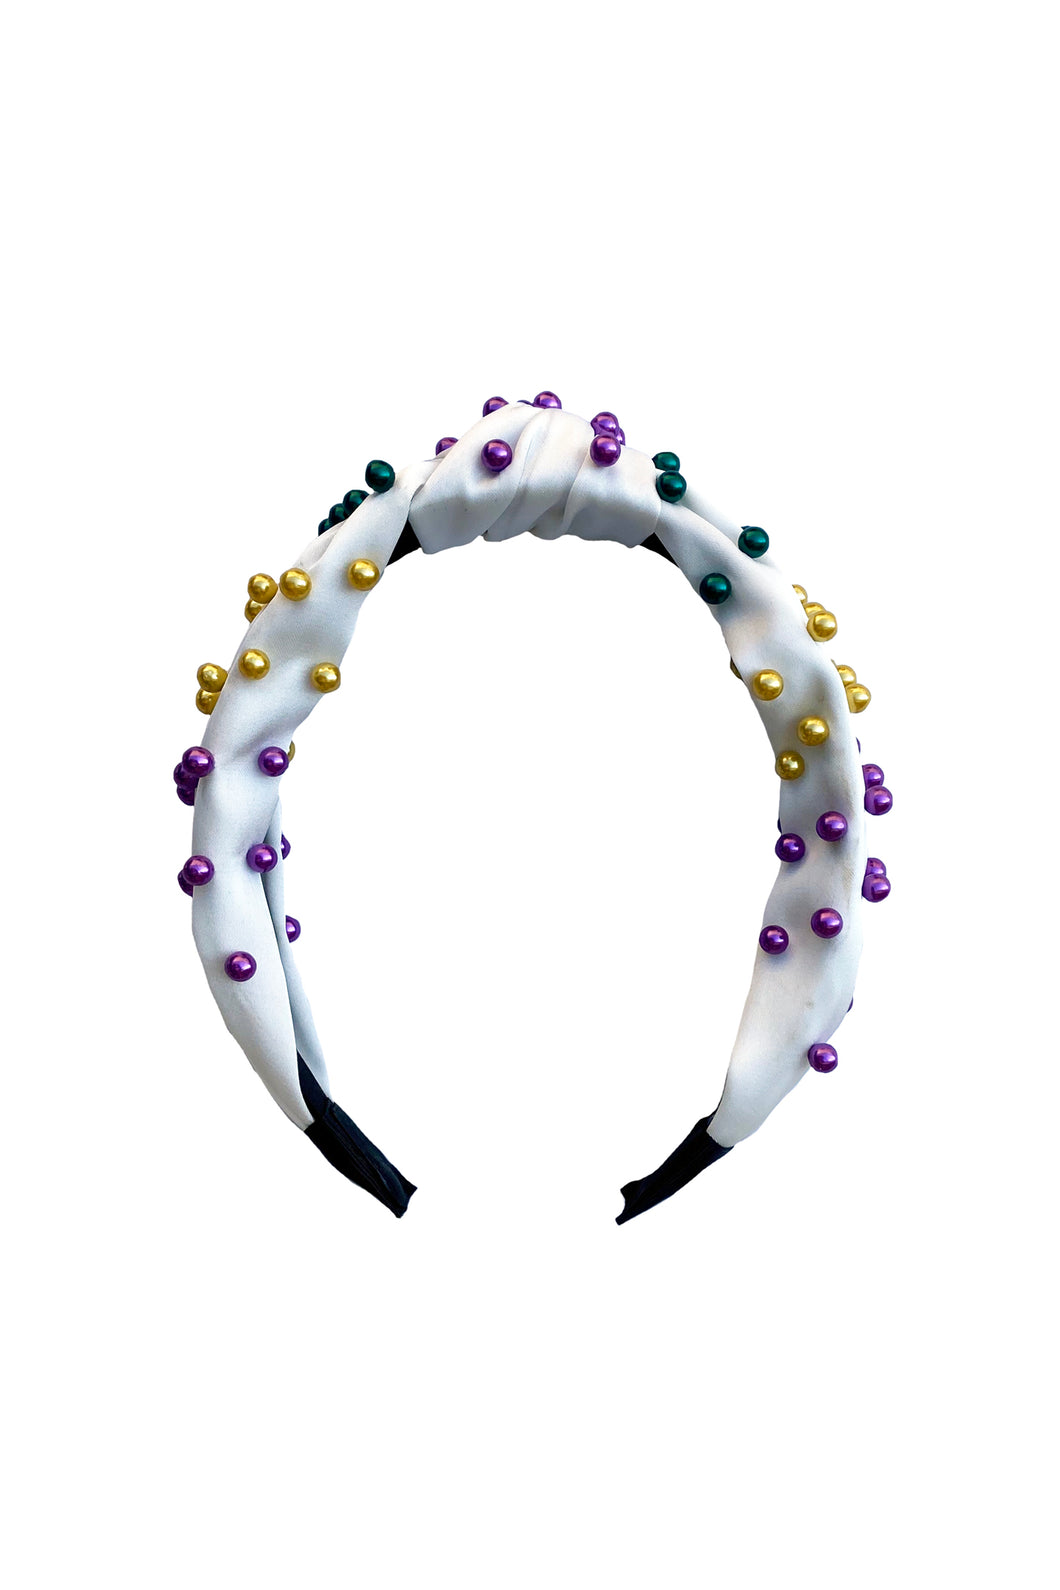 Pearl Headband - White with Purple, Green, and Gold Beads